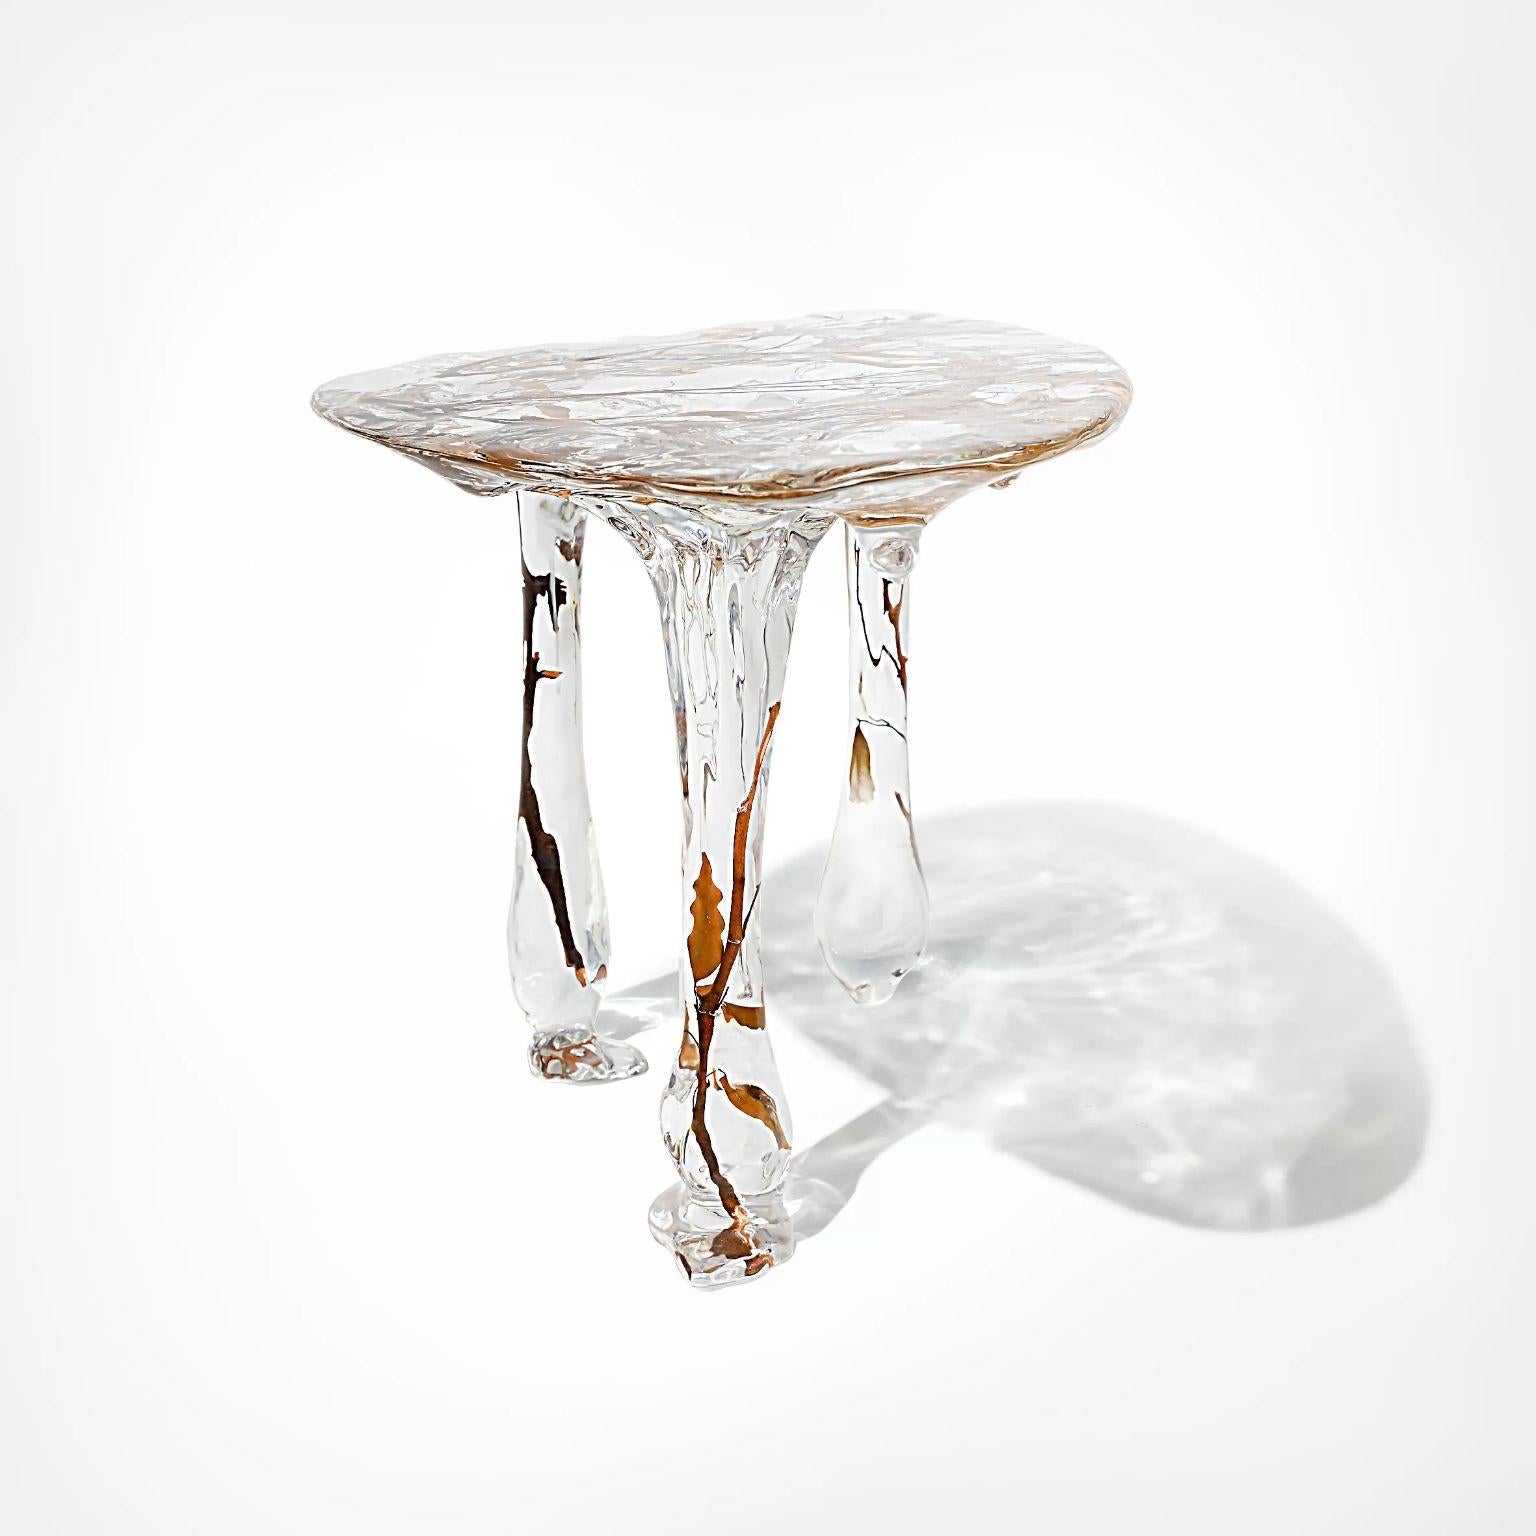 Crystal Branched Adorned Coffee Table by Dainte
Dimensions: D 76 x W 46 x H 48.5 cm.
Materials: Crystal.

Available in a circular and elongated oval design. Please contact us. 

This finely crafted table is a sophisticated piece of decor that will